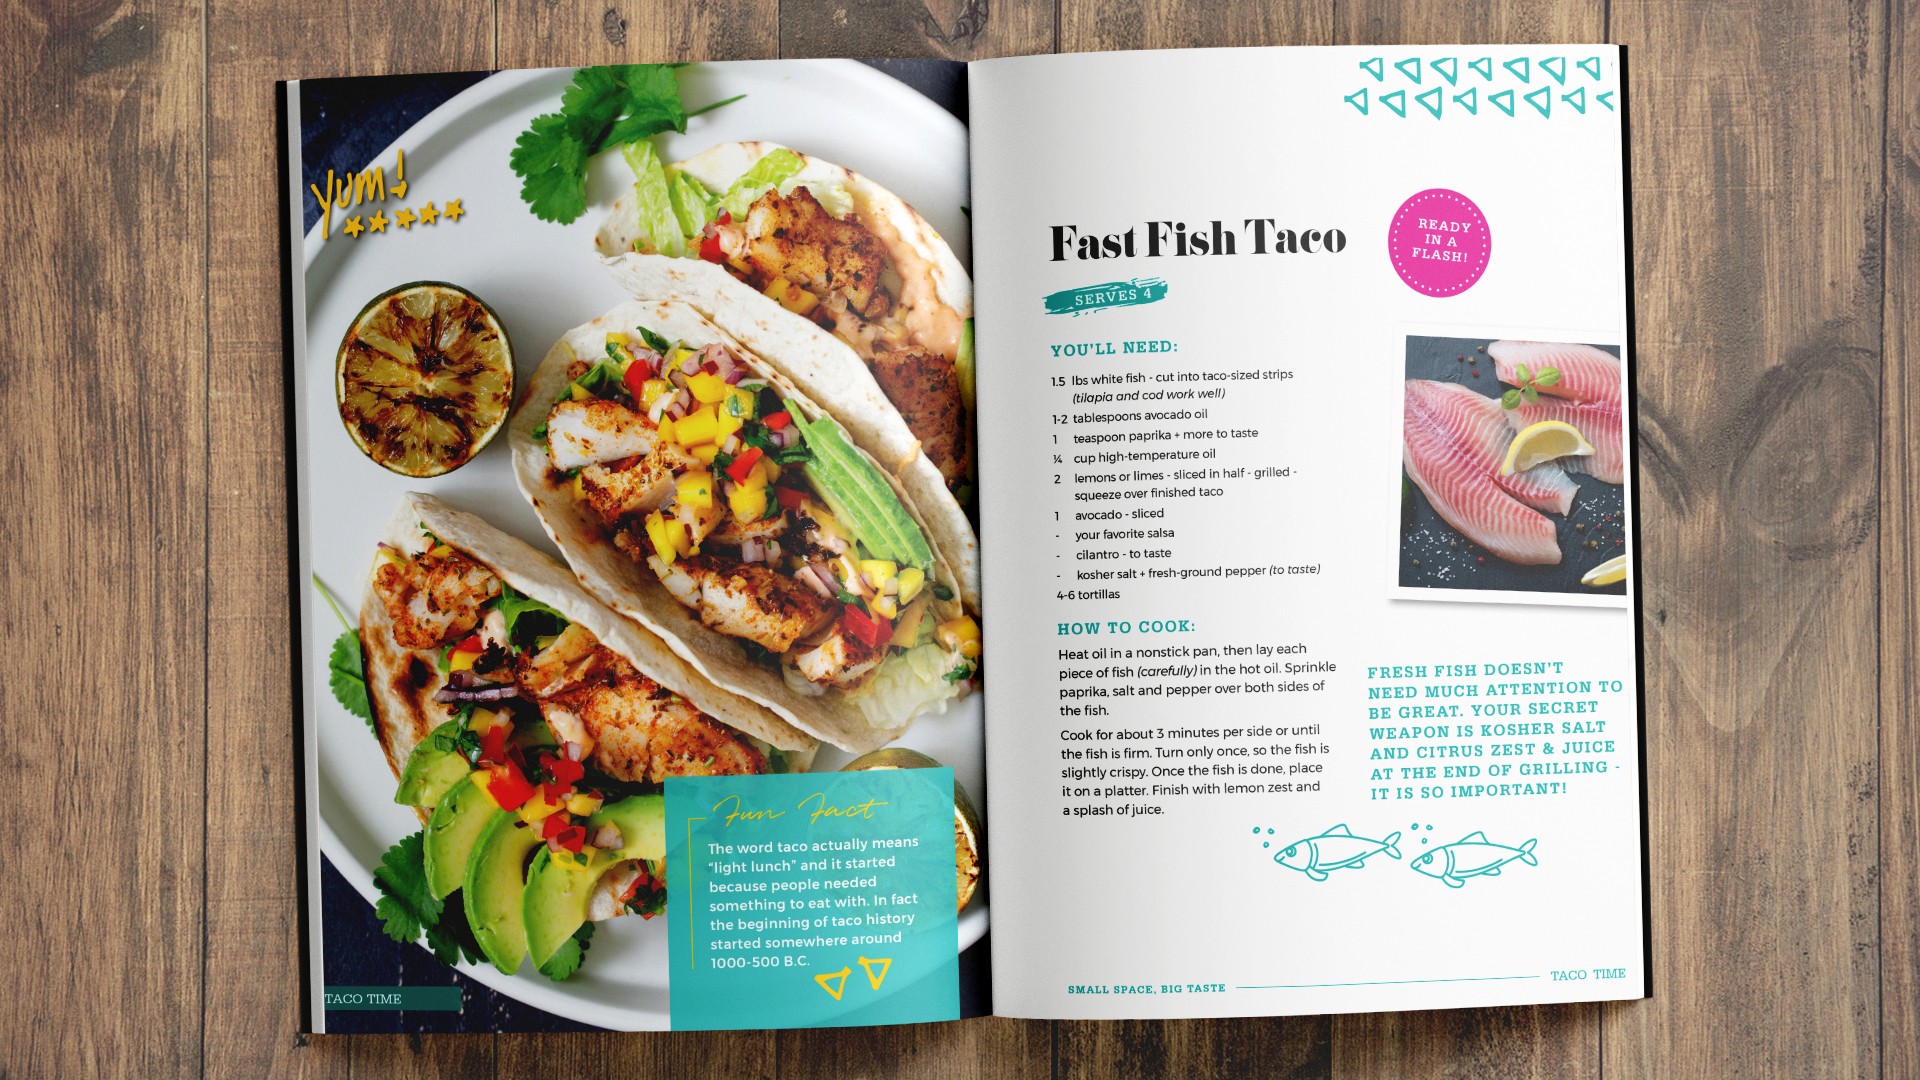 featured image two:Small Space, Big Taste Cookbook